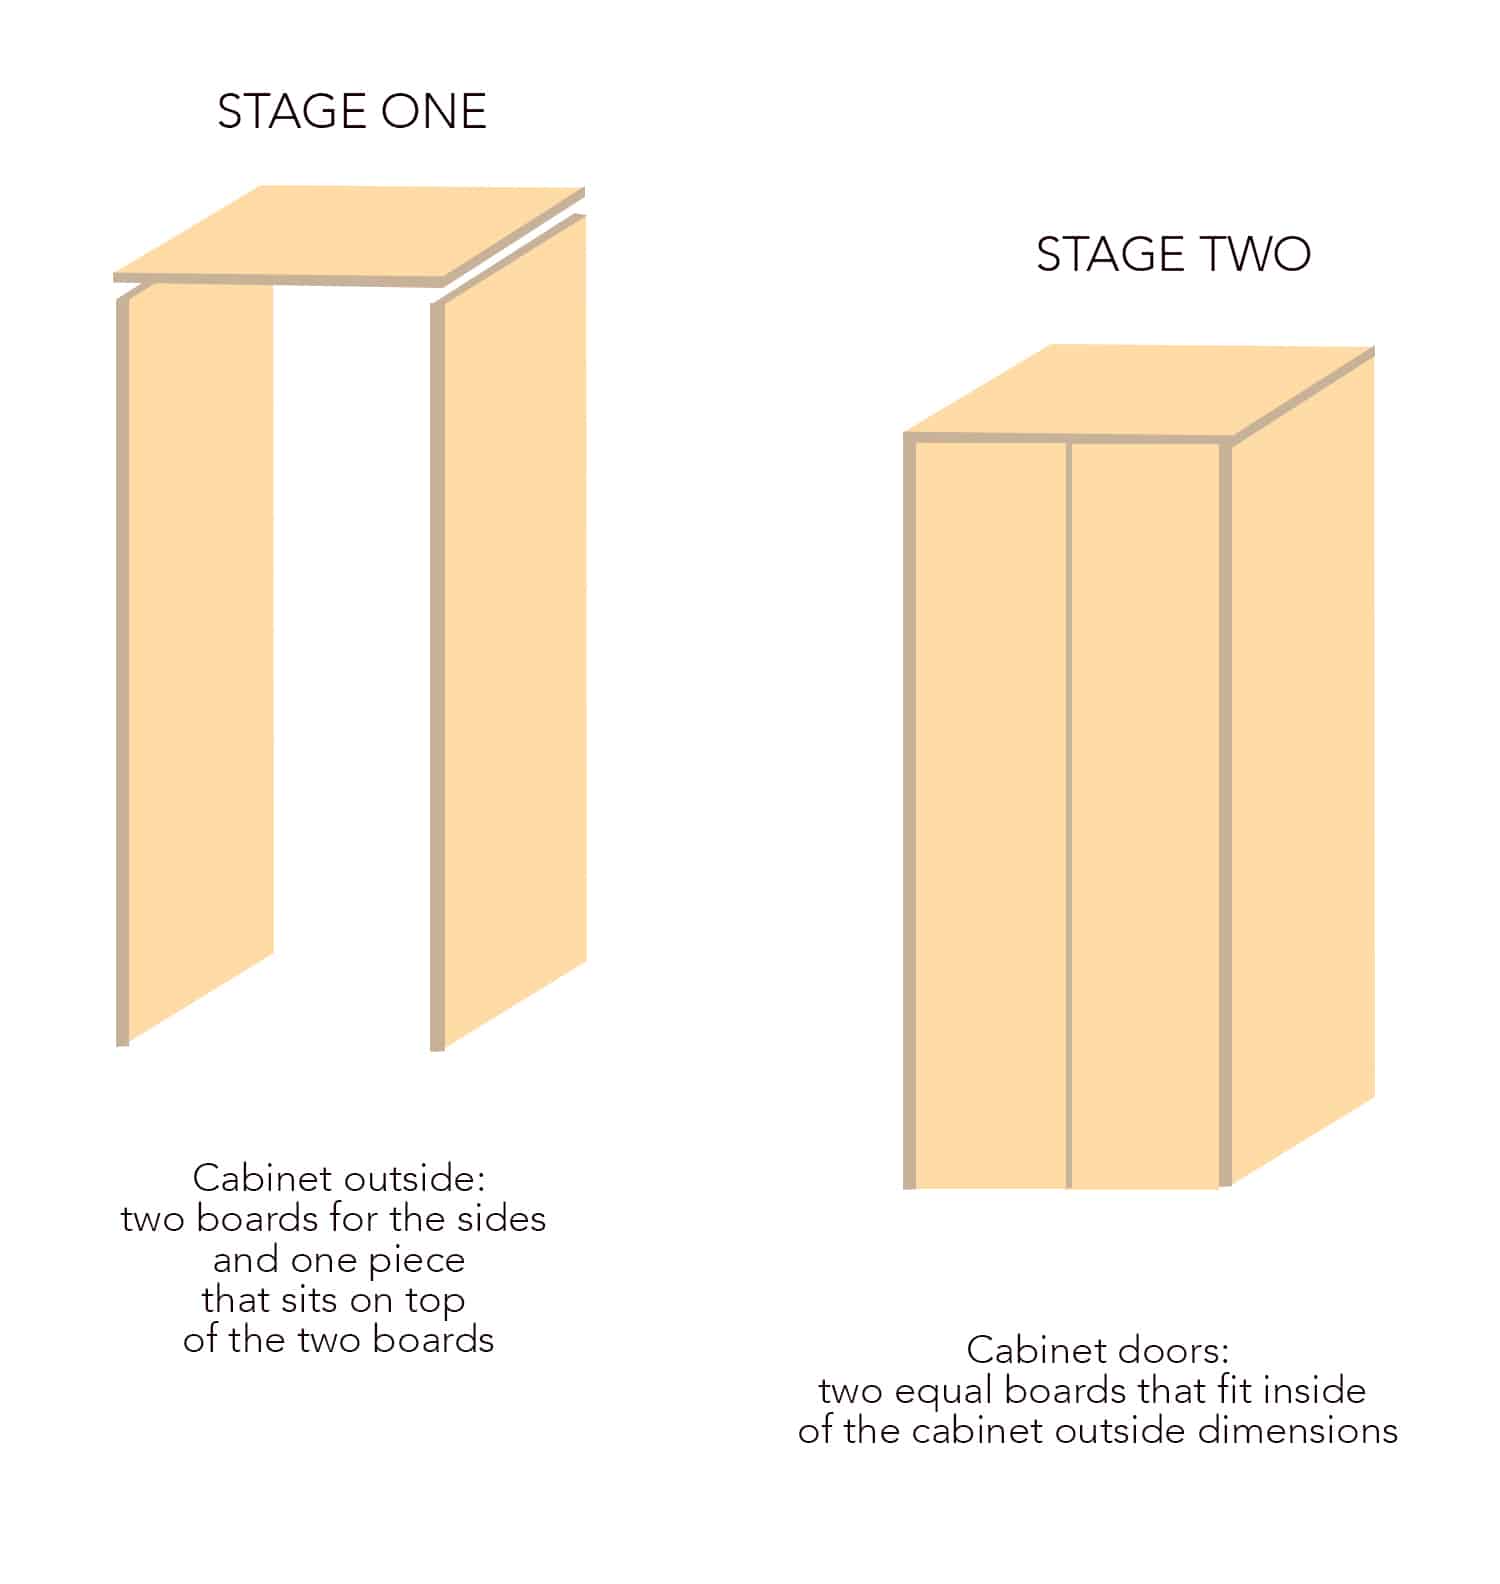 a drawing of stage one - two boards for the sides and one piece that sits on top fo the two boards and stage two - cabinet doors: two equal boards that fit inside of the cabinet outside dimensions